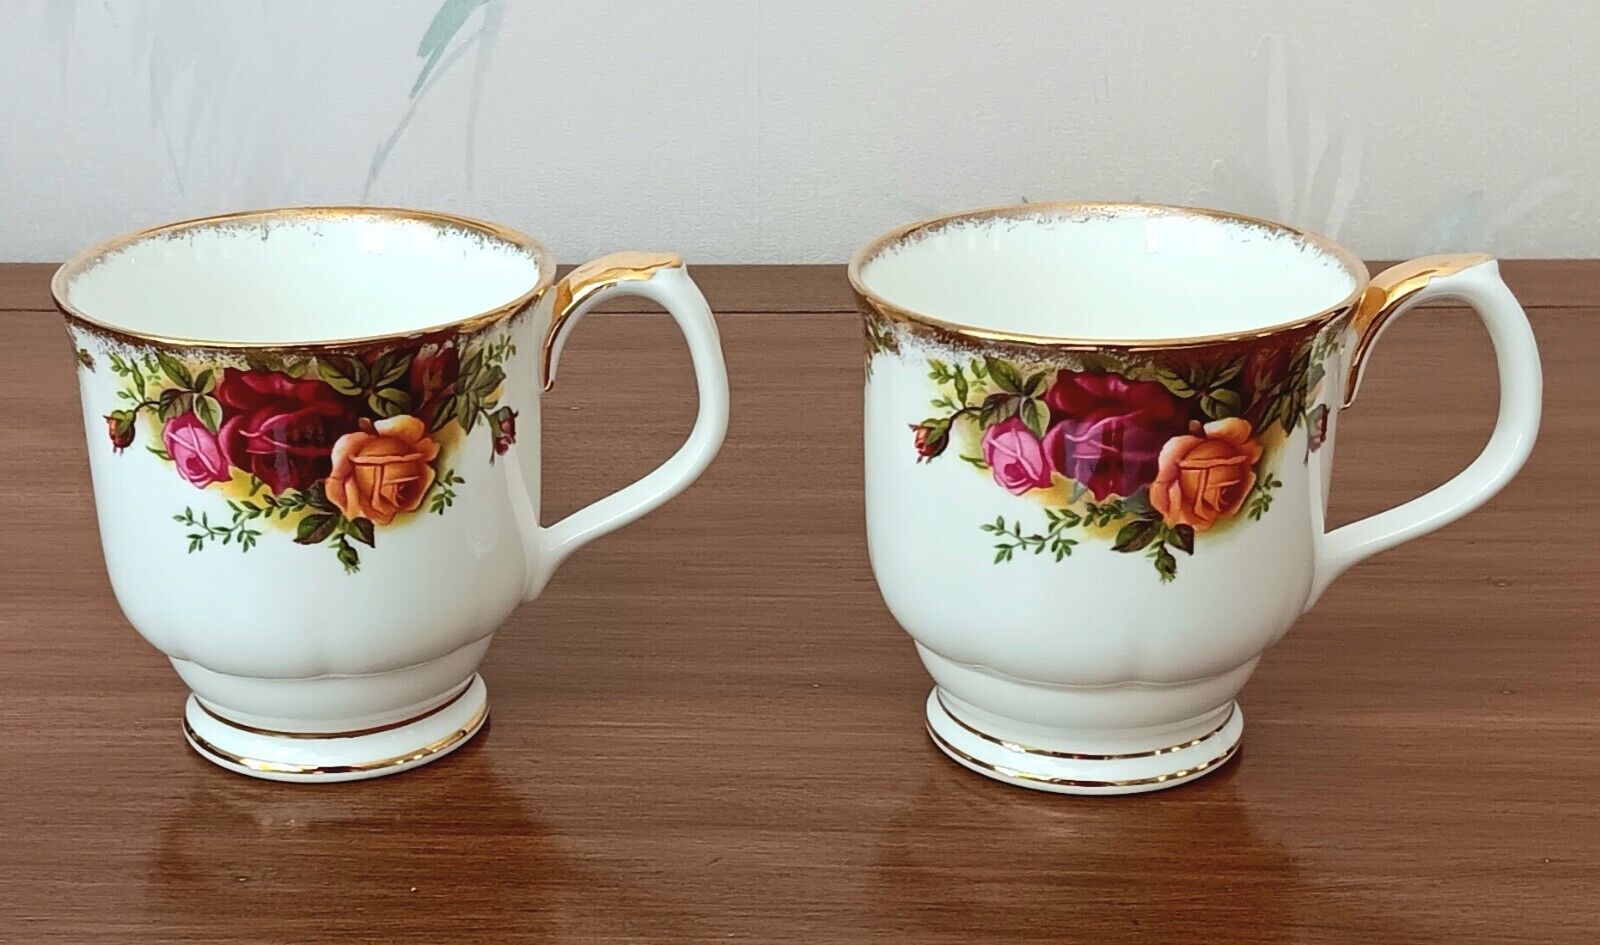 Royal Albert Old Country Roses Bone China 2 Footed Coffee Mugs Made in England